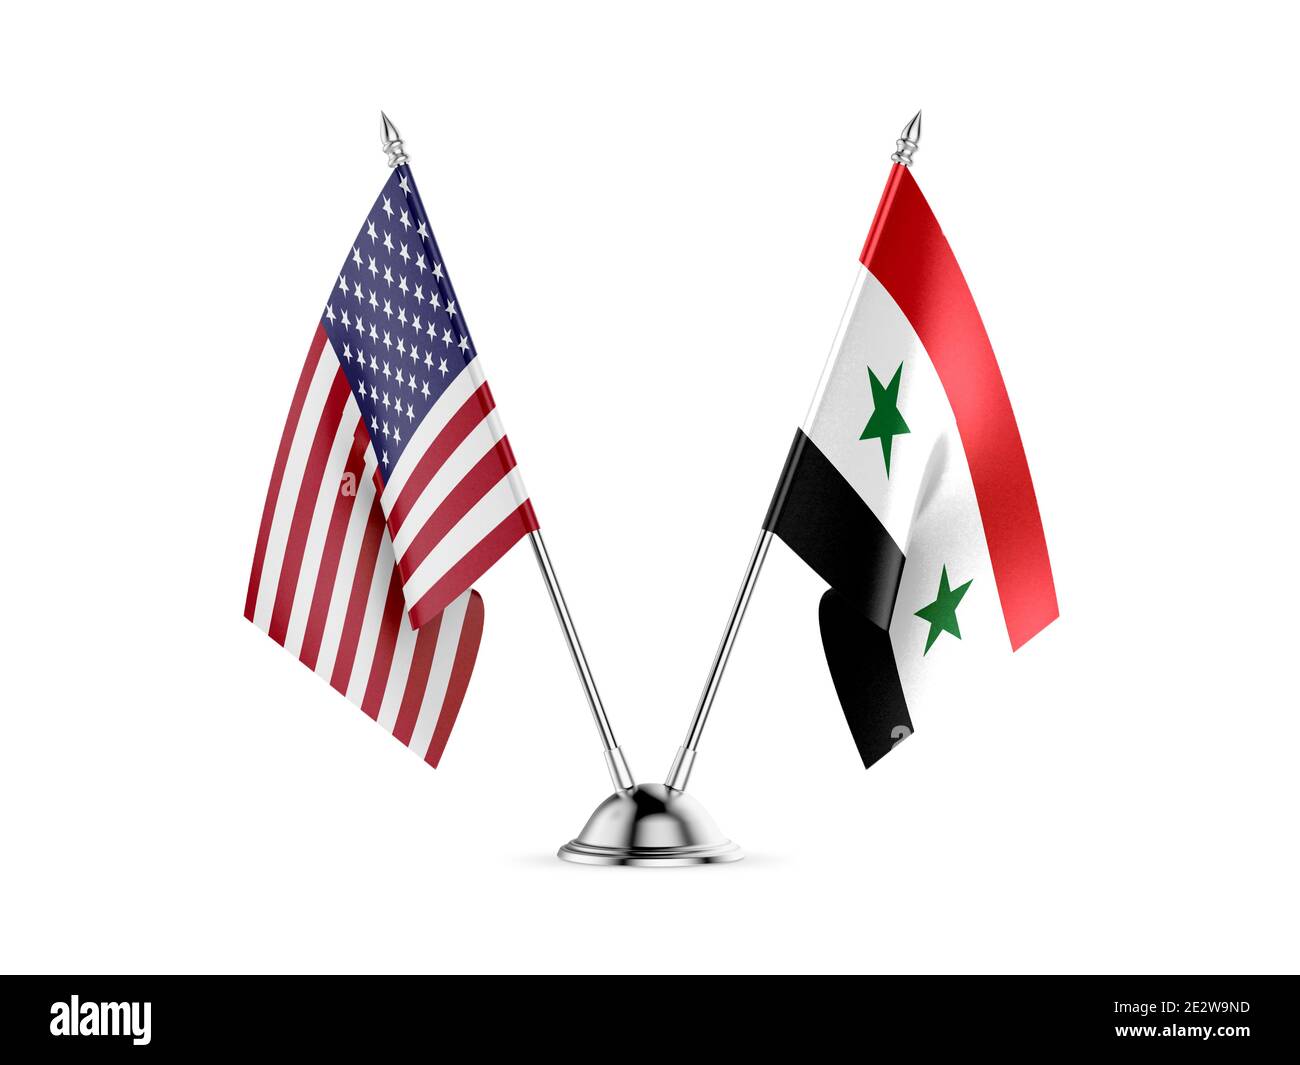 Desk flags, United States  America  and Syria, isolated on white background. 3d image Stock Photo